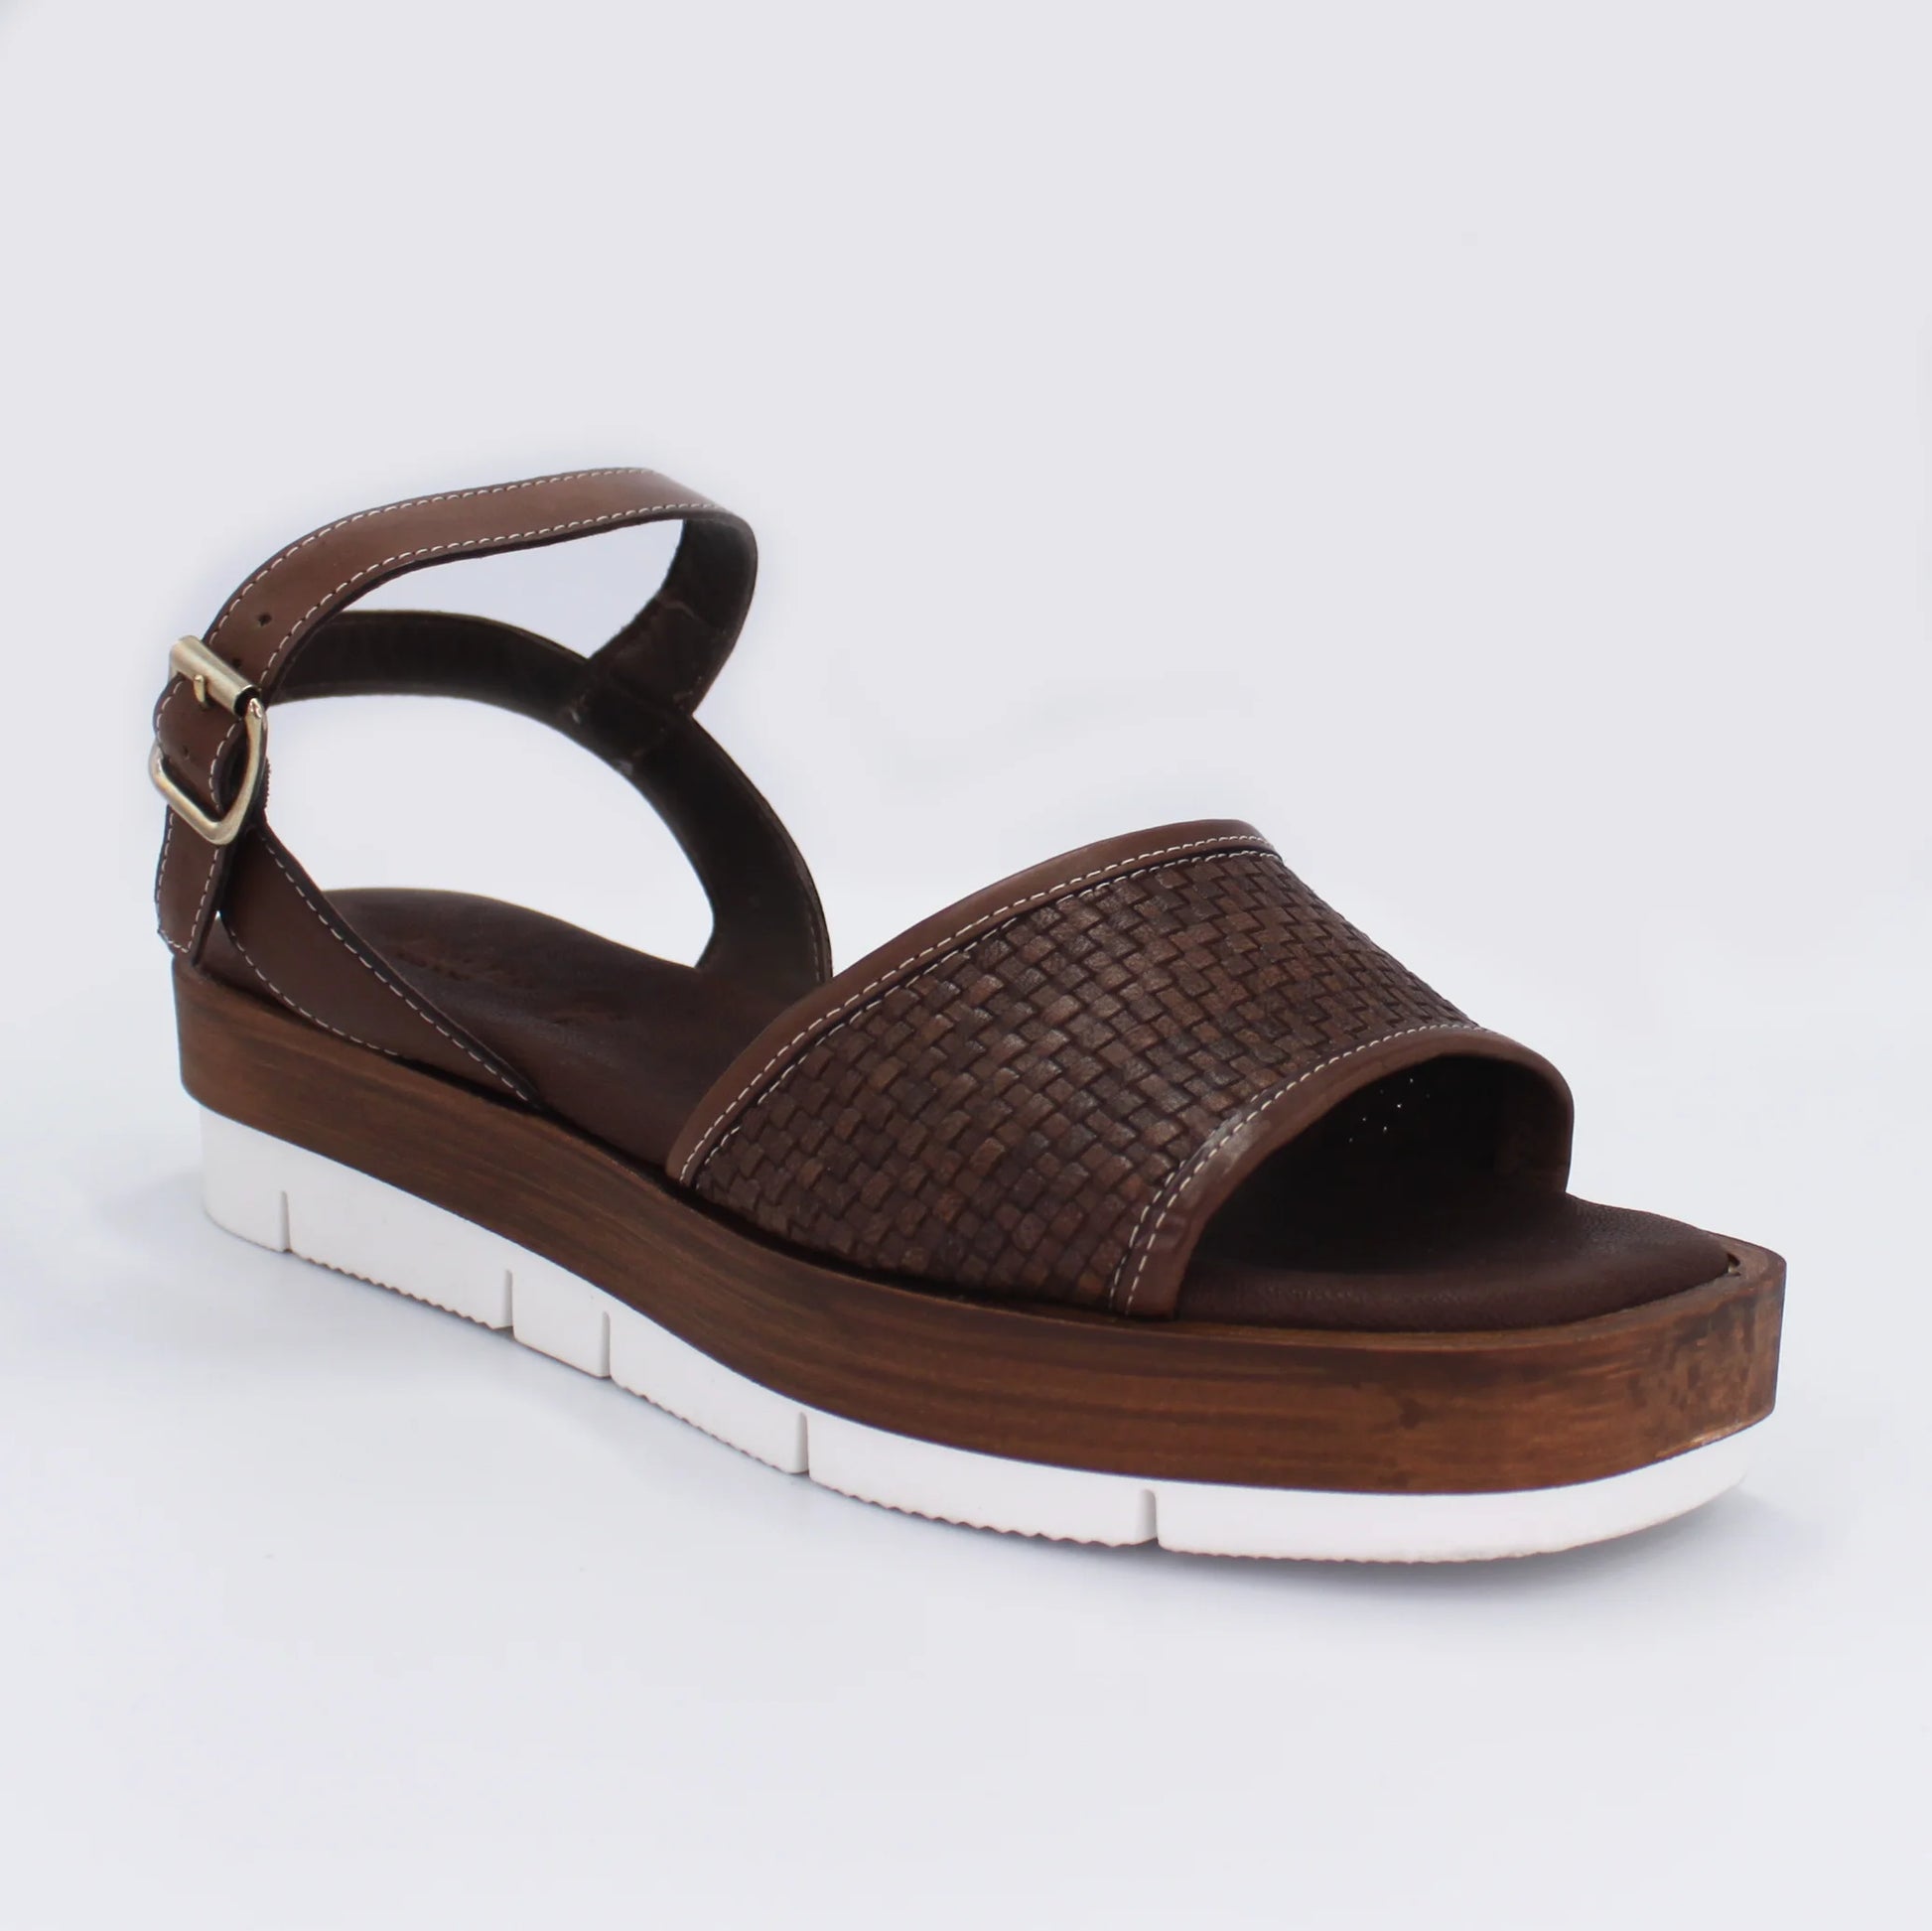 Shop Handmade Italian Leather Strap Sandal in Tabacco Brown (13030) or browse our range of hand-made Italian sandals for women in leather or suede in-store at Aliverti Durban or Cape Town, or shop online. We deliver in South Africa & offer multiple payment plans as well as accept multiple safe & secure payment methods.